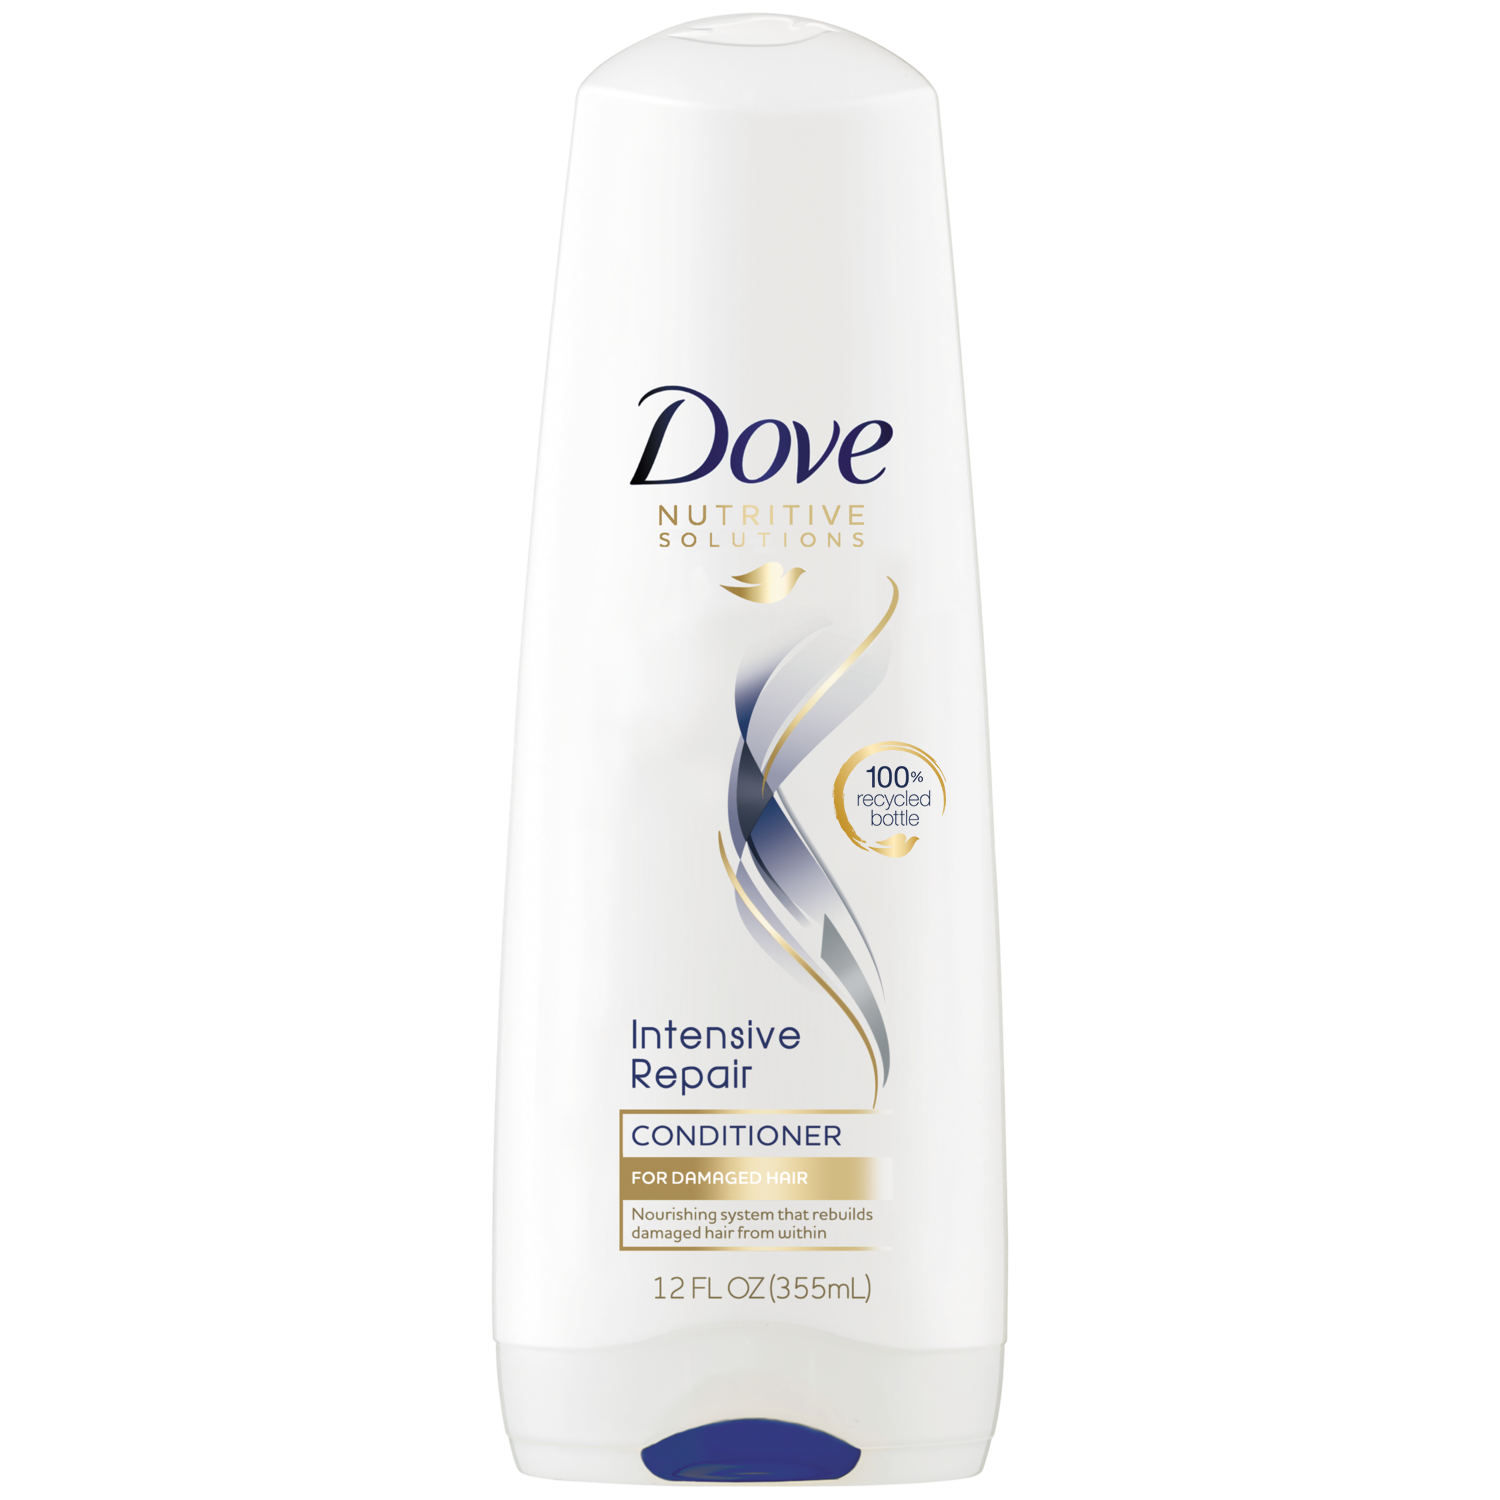 Dove Care that goes further